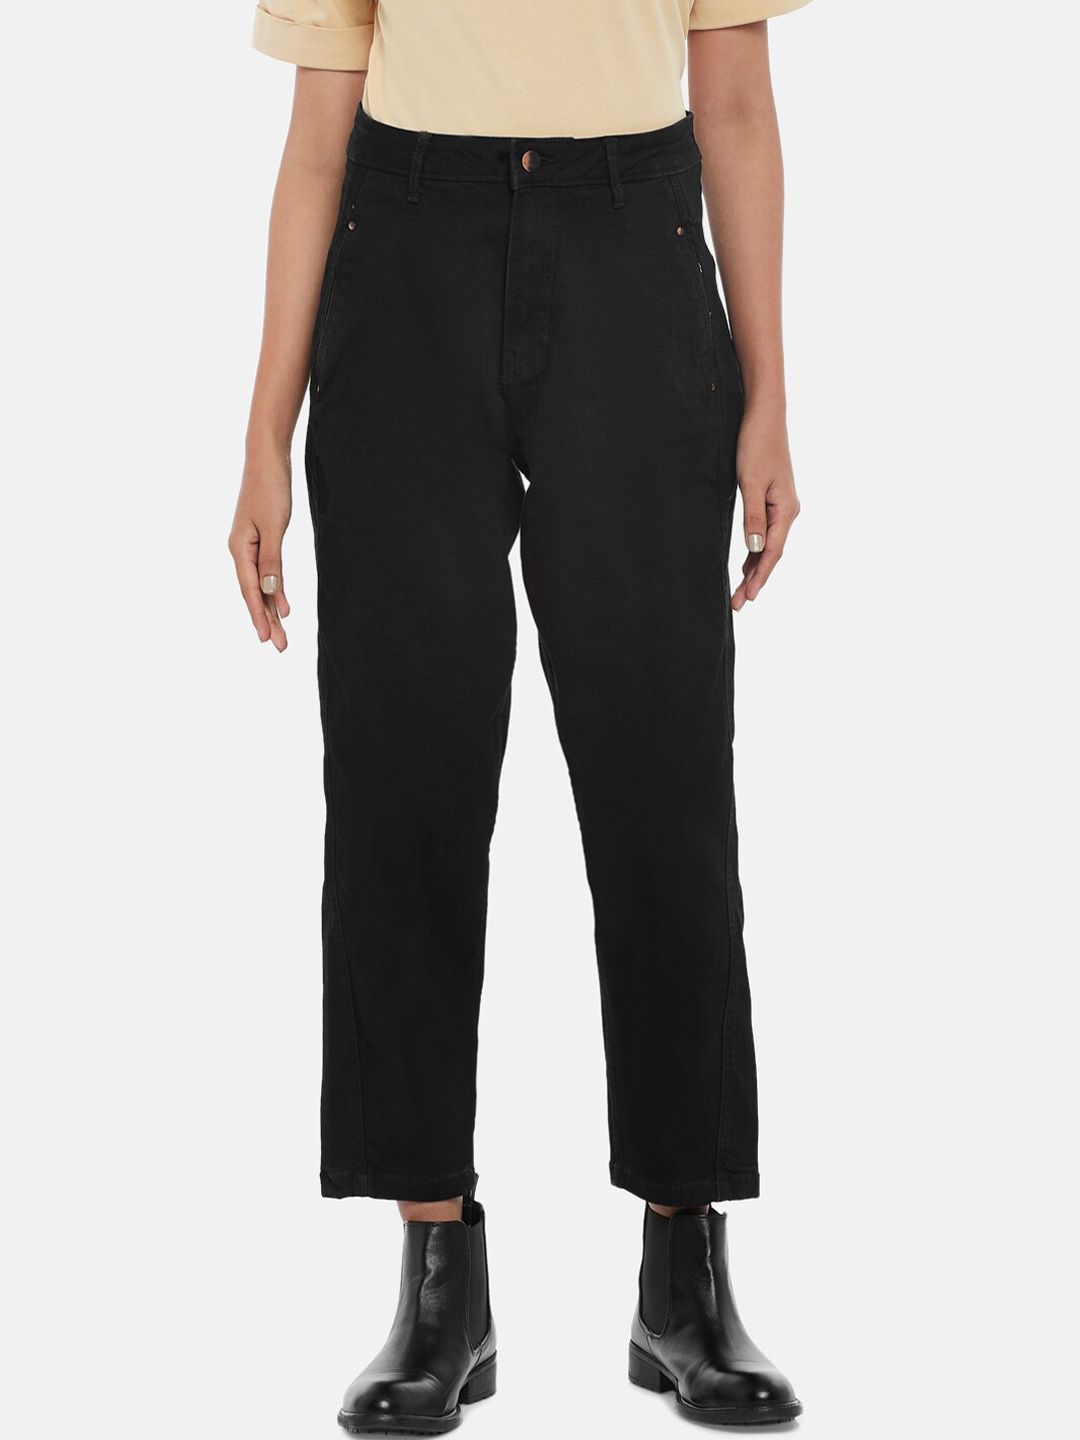 SF JEANS by Pantaloons Women Black High-Rise Jeans Price in India